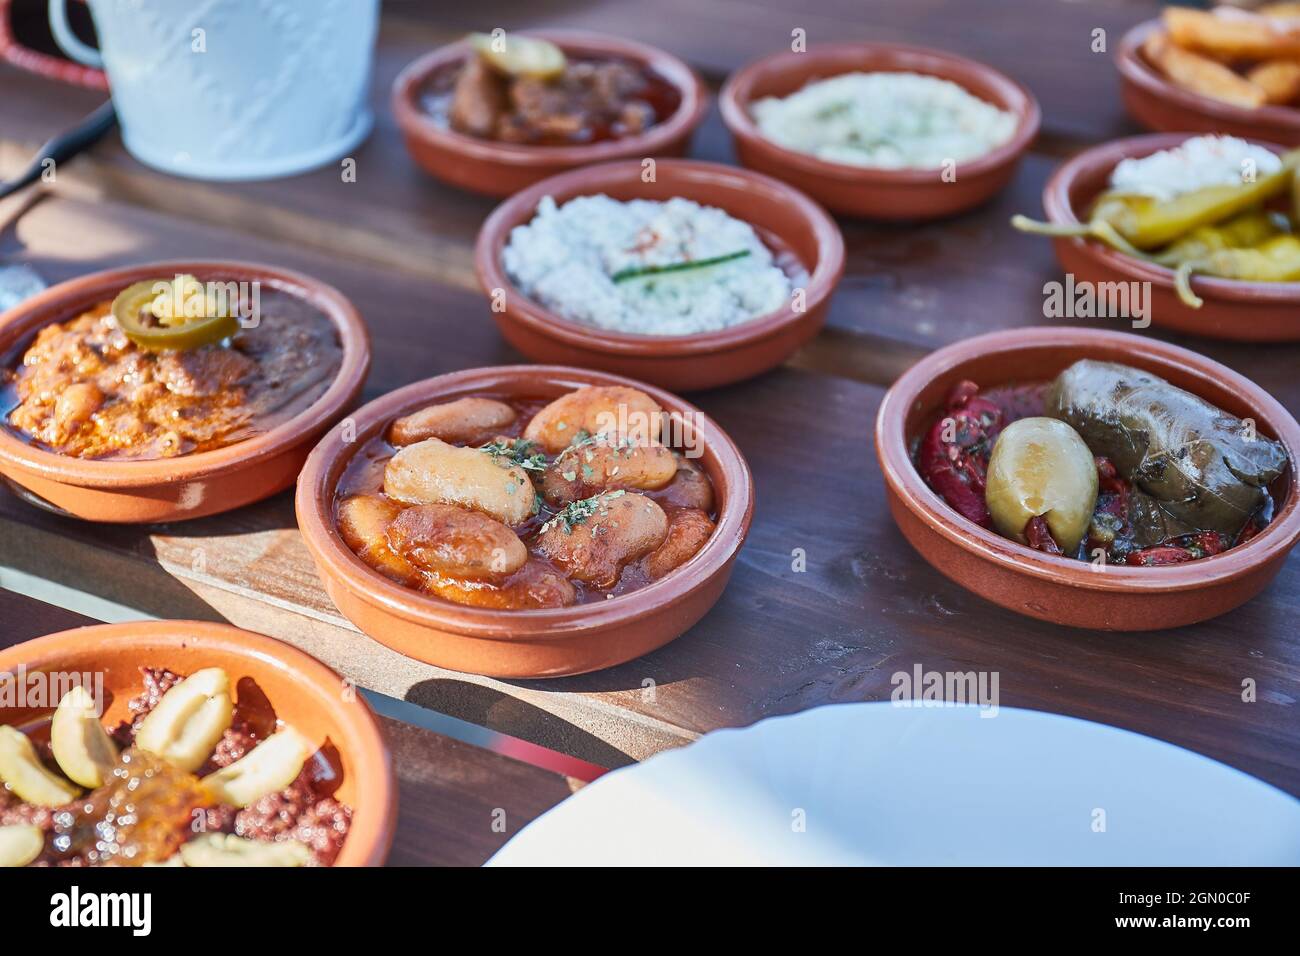 Tapas served in many small plates Stock Photo